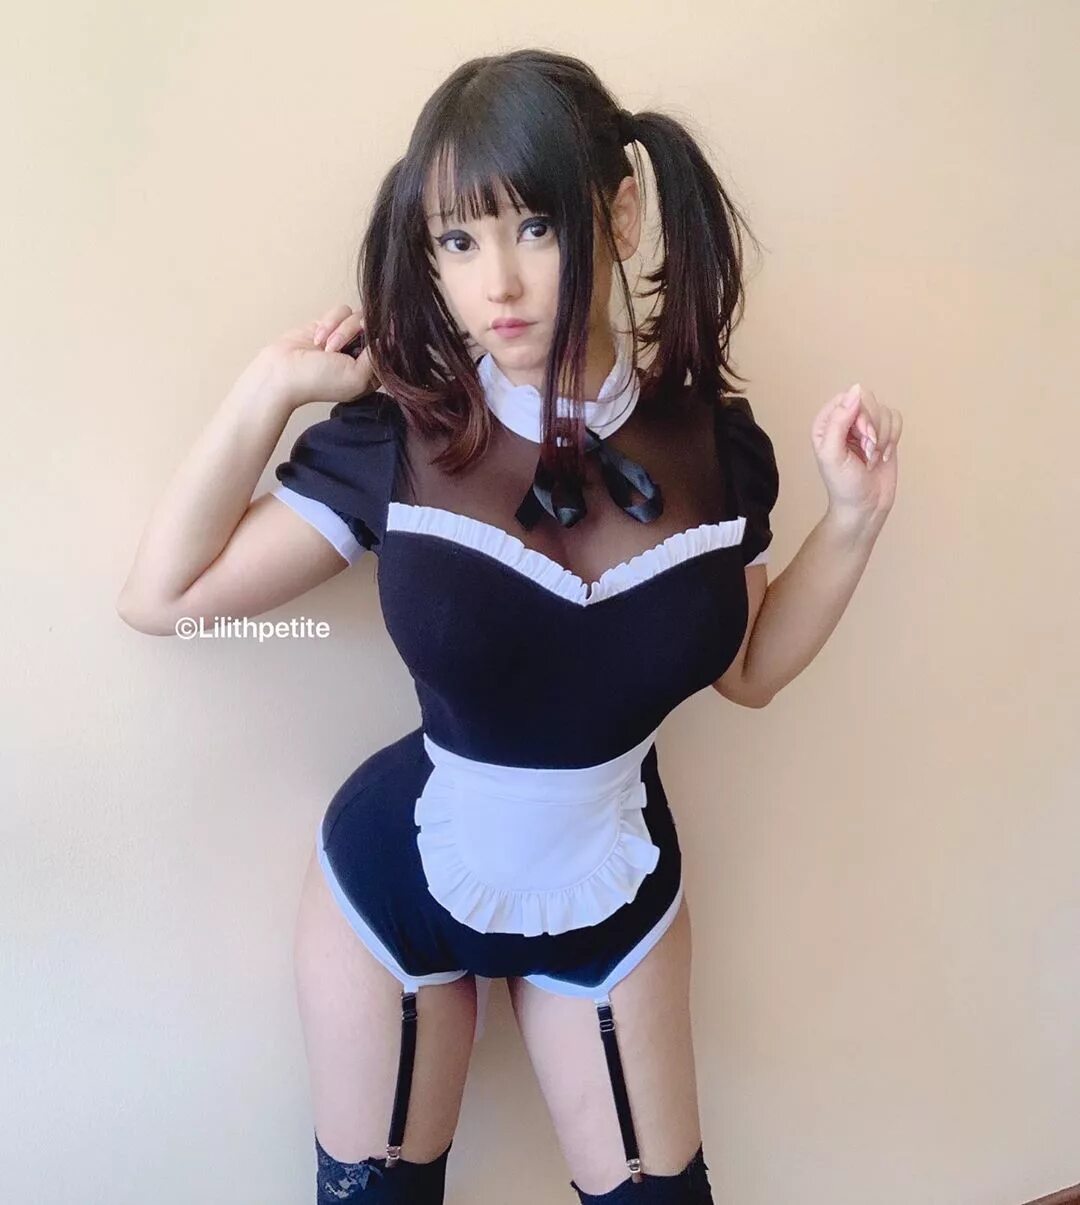 Lilith Petite 🎮 en Instagram: "Does anyone need a Maid? 💌 Lilith Pet...